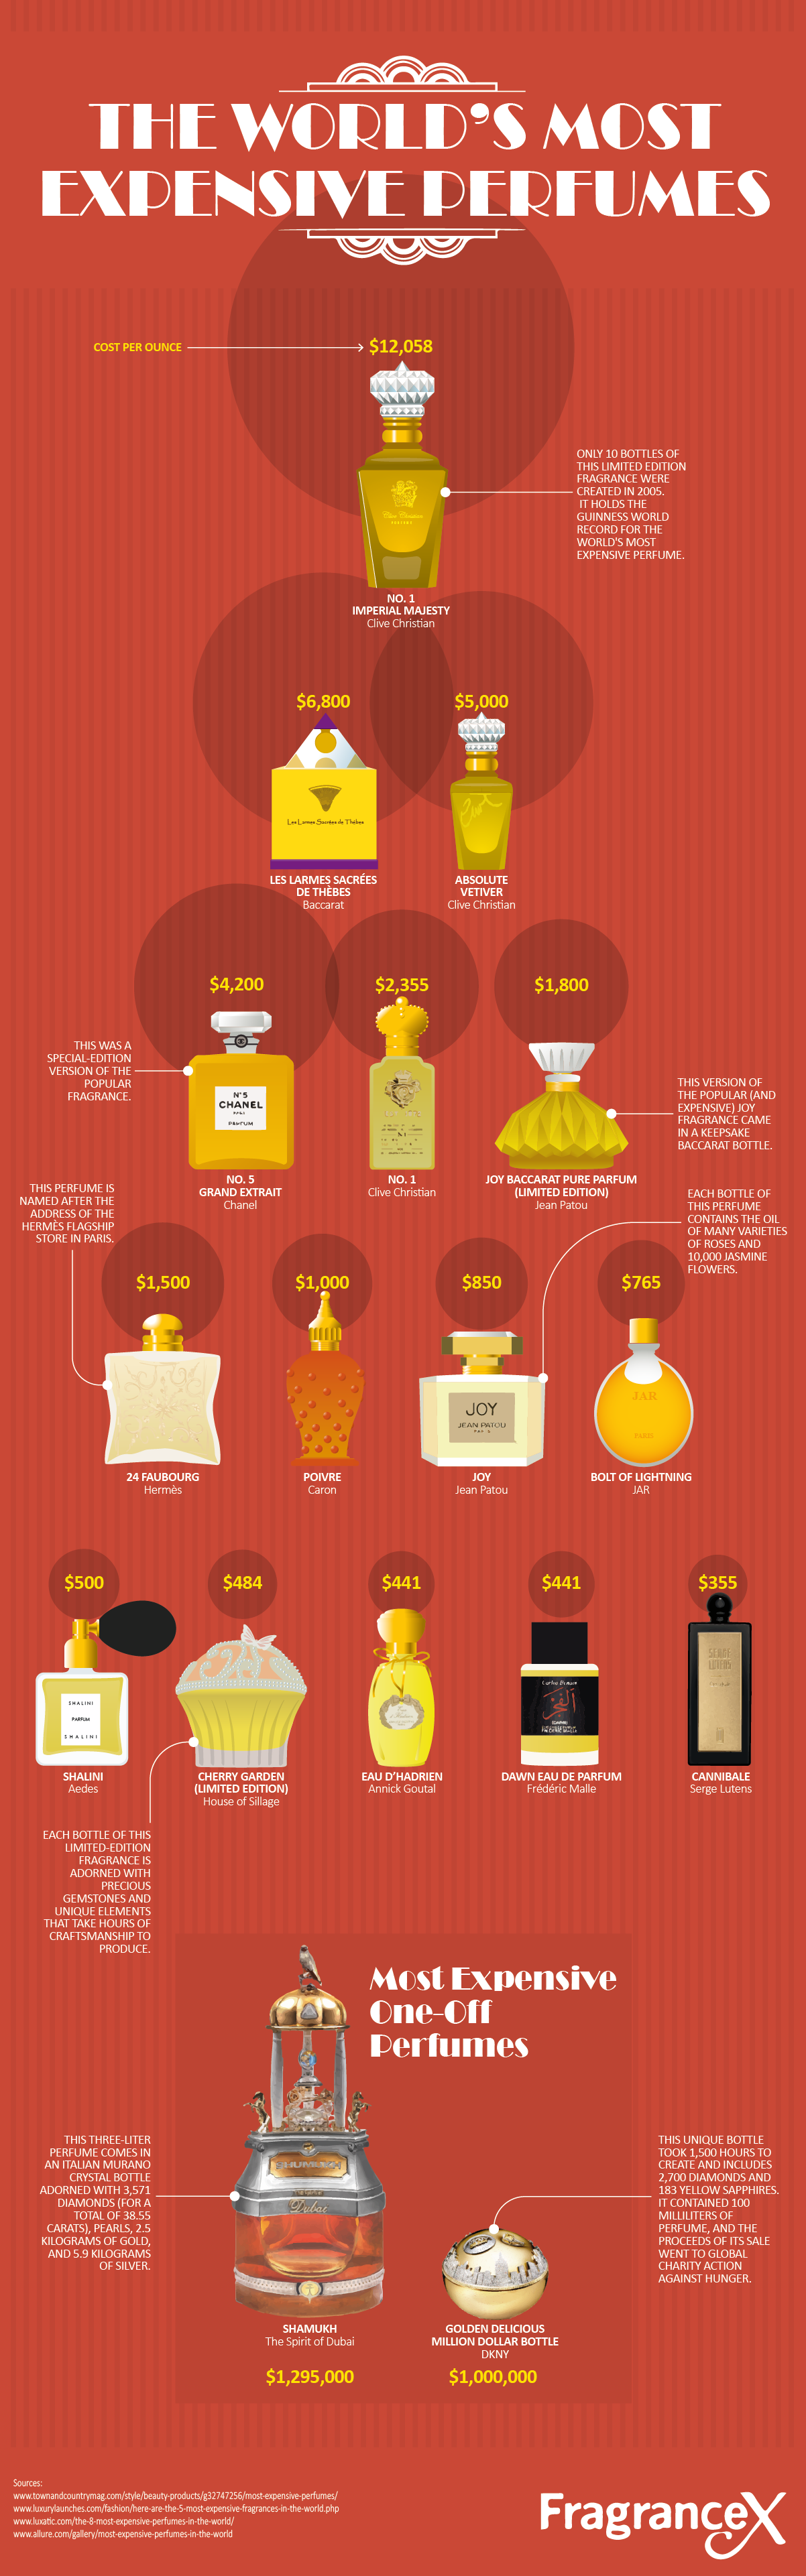 The World’s Most Expensive Perfumes by FragranceX